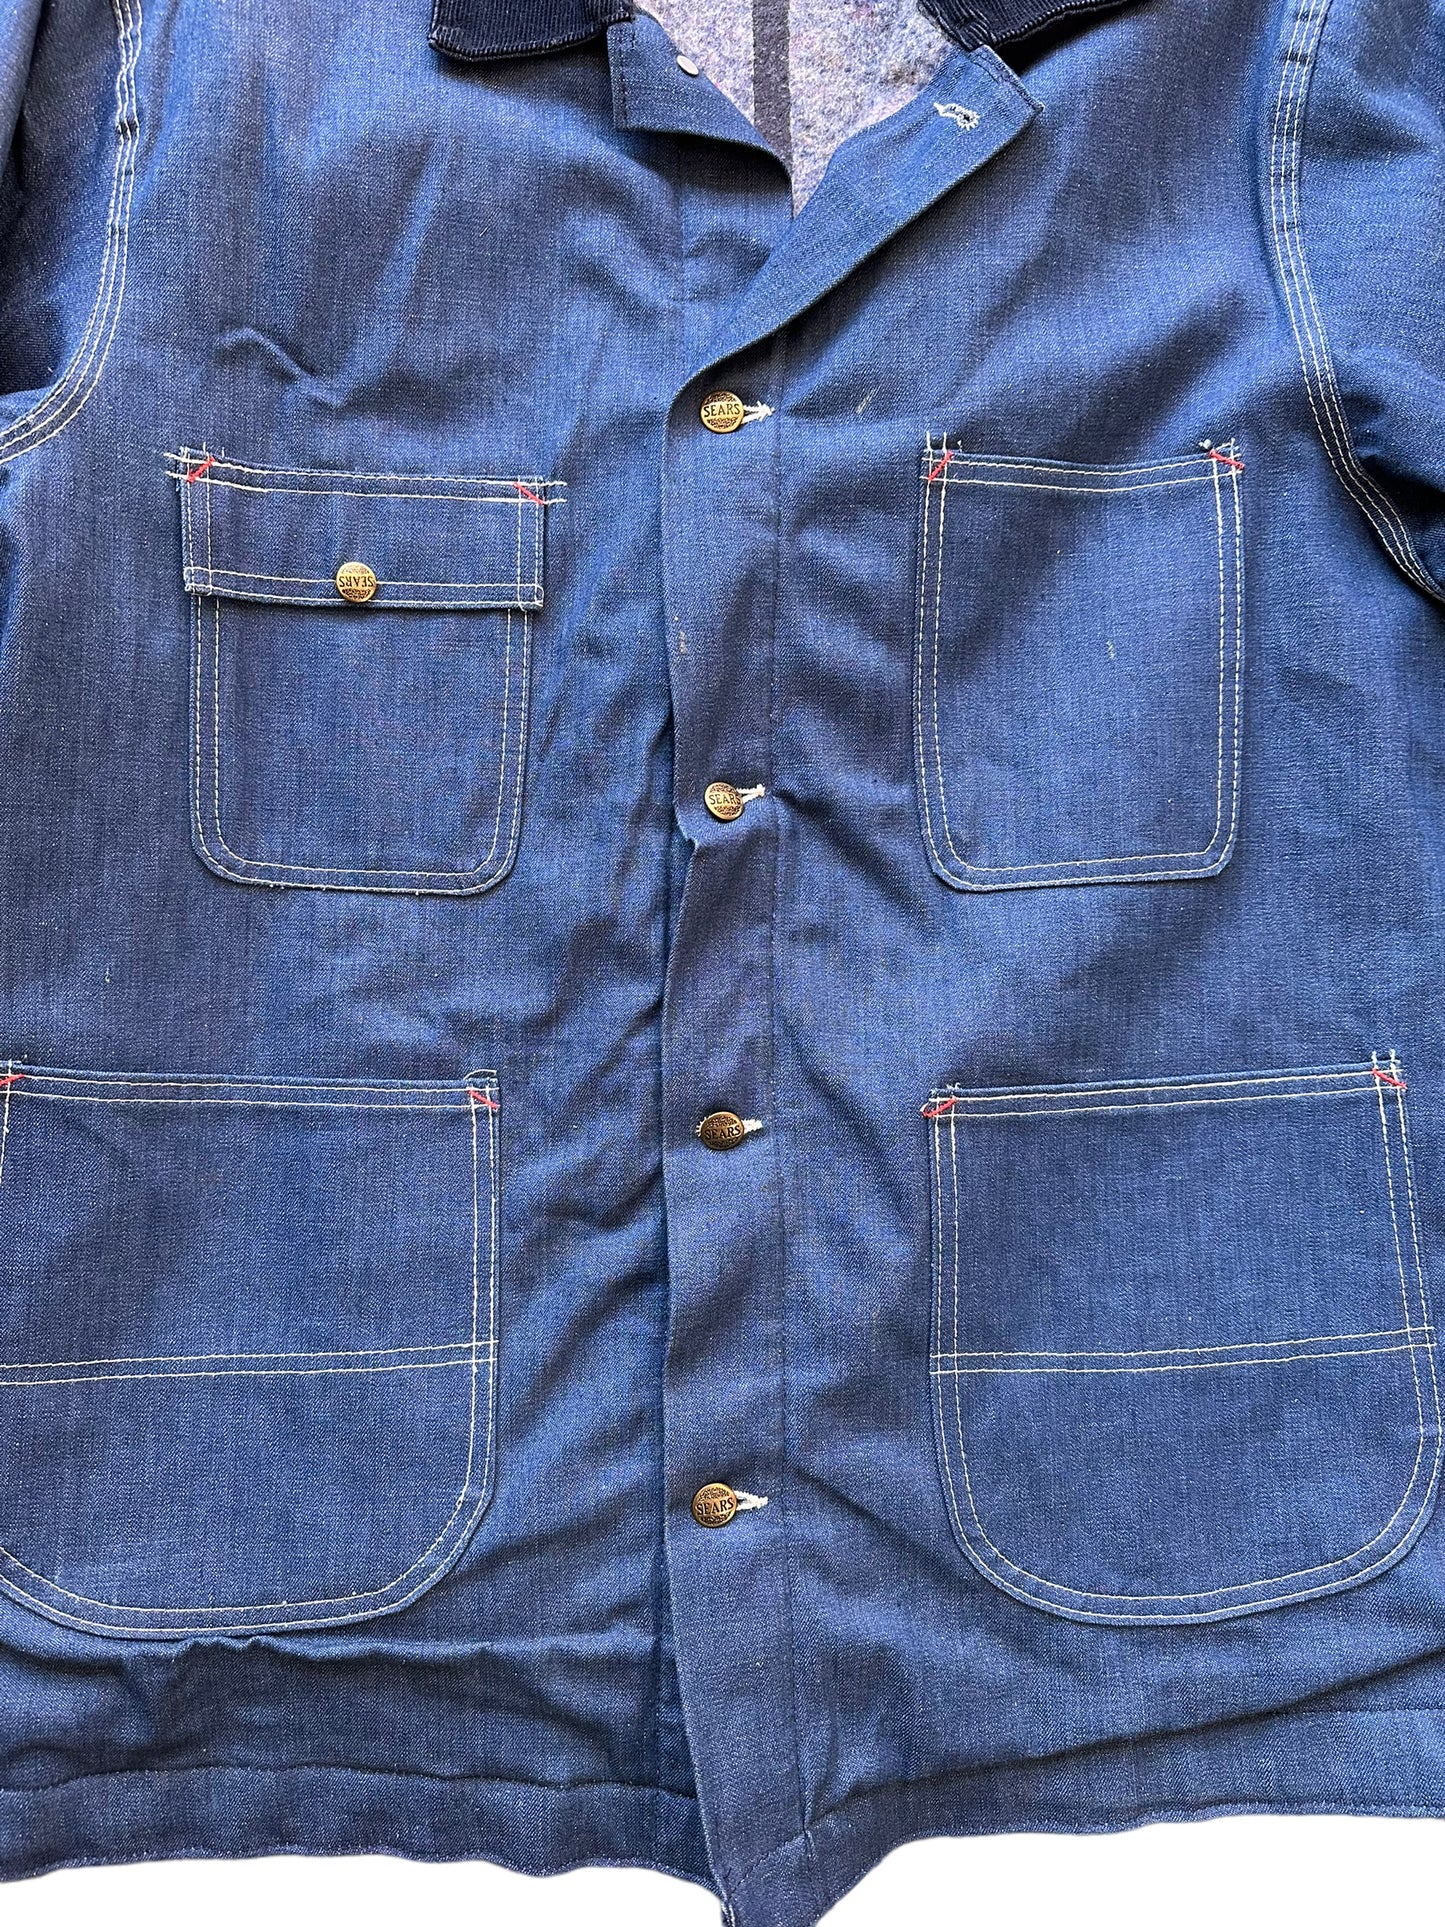 Front Chest View of Vintage Sears Blanket Lined Denim Chore Coat SZ XL | Vintage Denim Chore Coat | Barn Owl Vintage Seattle